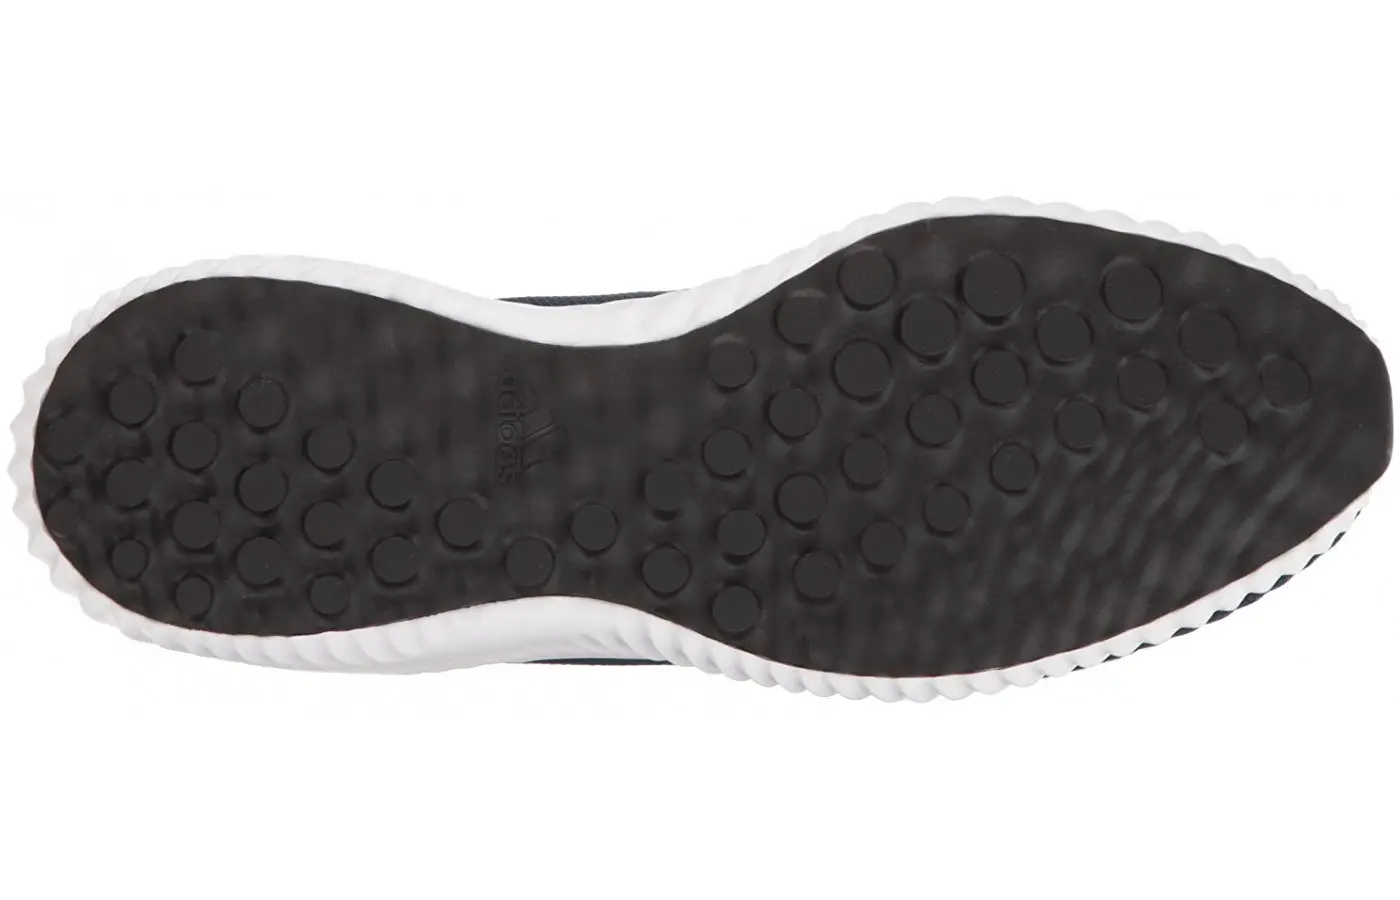 The signature dot-pattern of the Adidas Alpha Bounce outsole